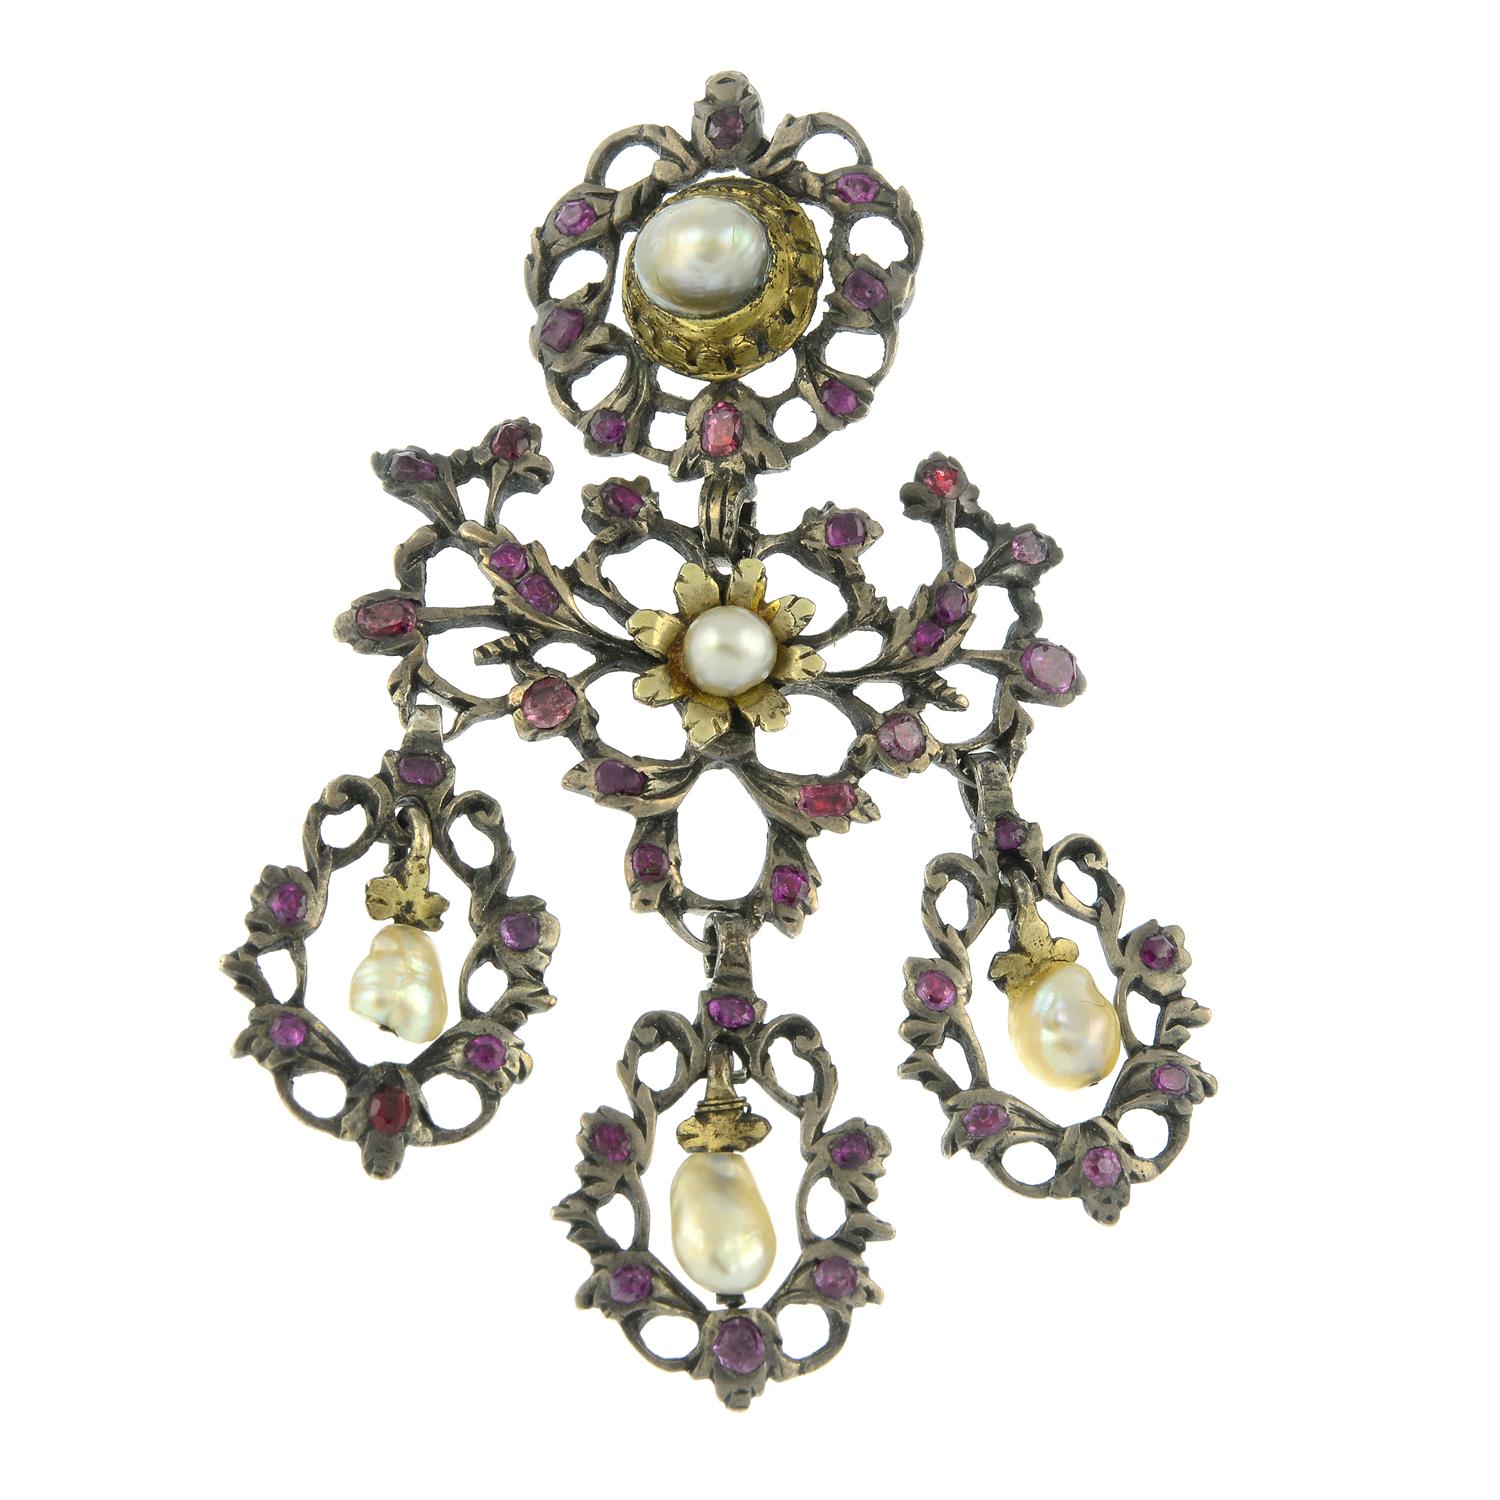 A late 18th century silver and gold pearl, foil back ruby girandole pendant. - Image 2 of 4